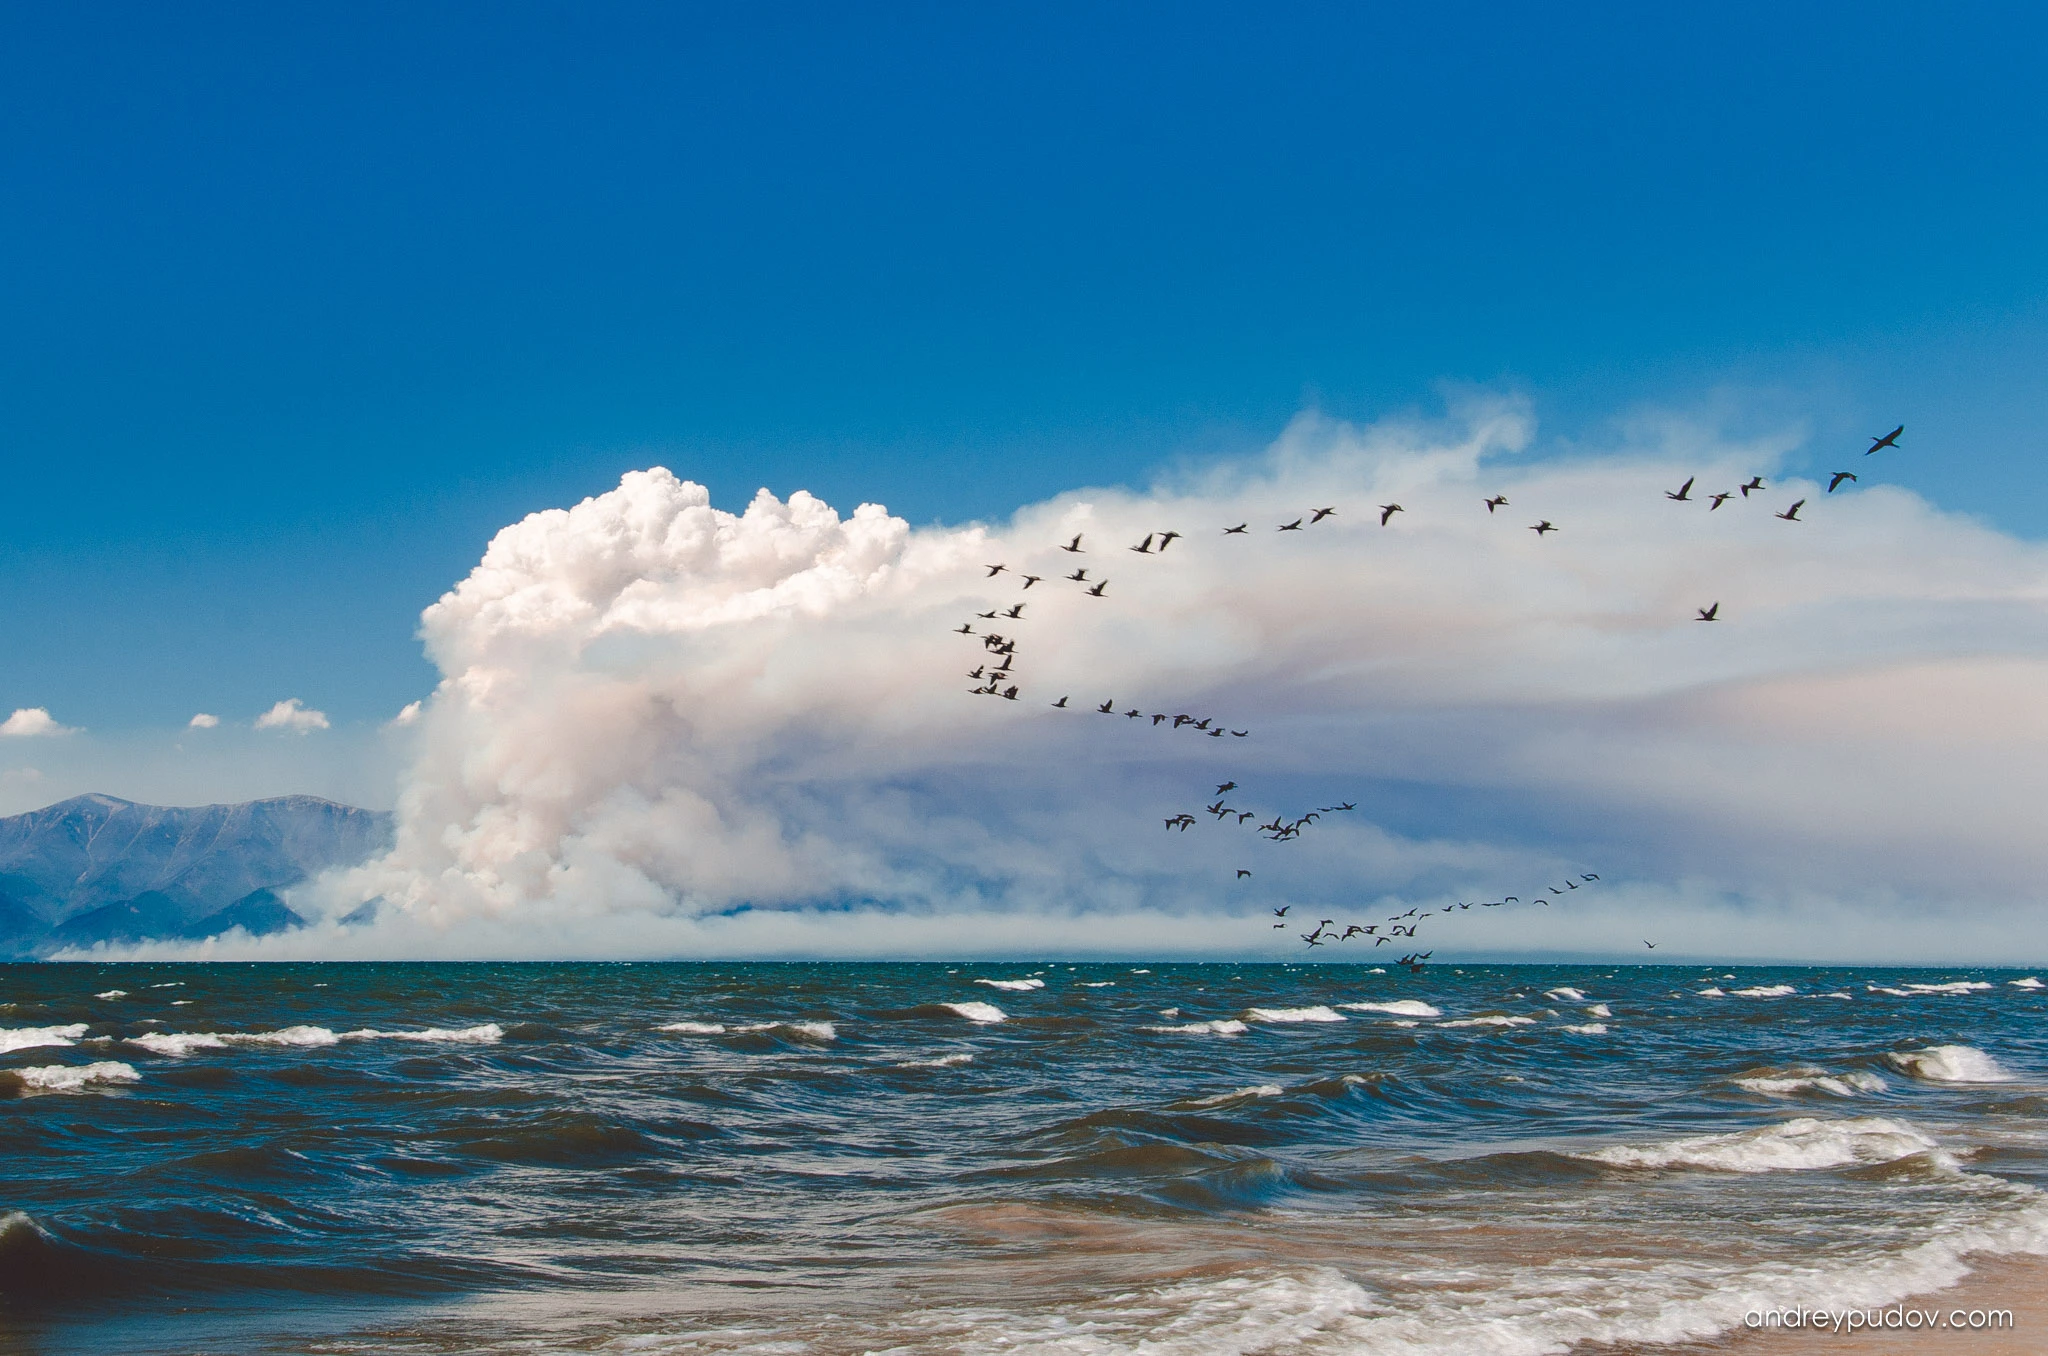 The Holy Nose Peninsula is on fire. Because of strong thunderstorms, since the end of July, violent fires have been raging in the mountains in the Baikal nature reserves. About 25,000 hectares of forest were affected by the fire.